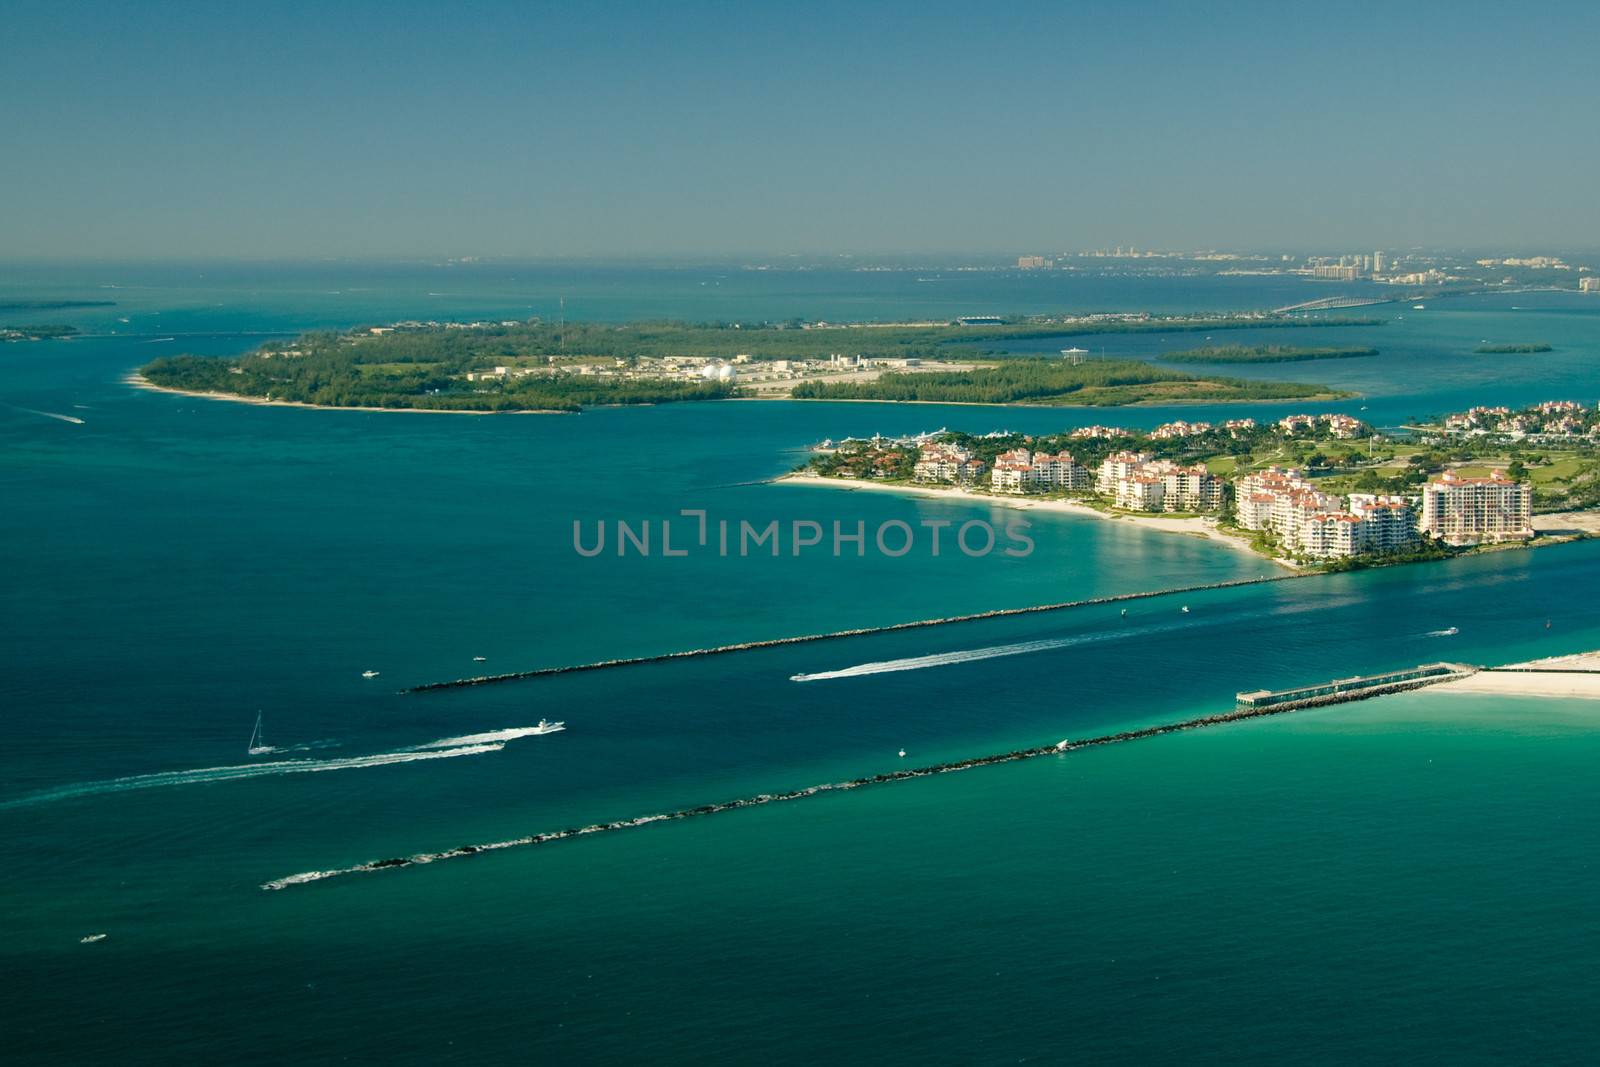 Aerial view of buildings on an island in the Atlantic Ocean, Fisher Island, Miami, Miami-Dade County, Florida, USA